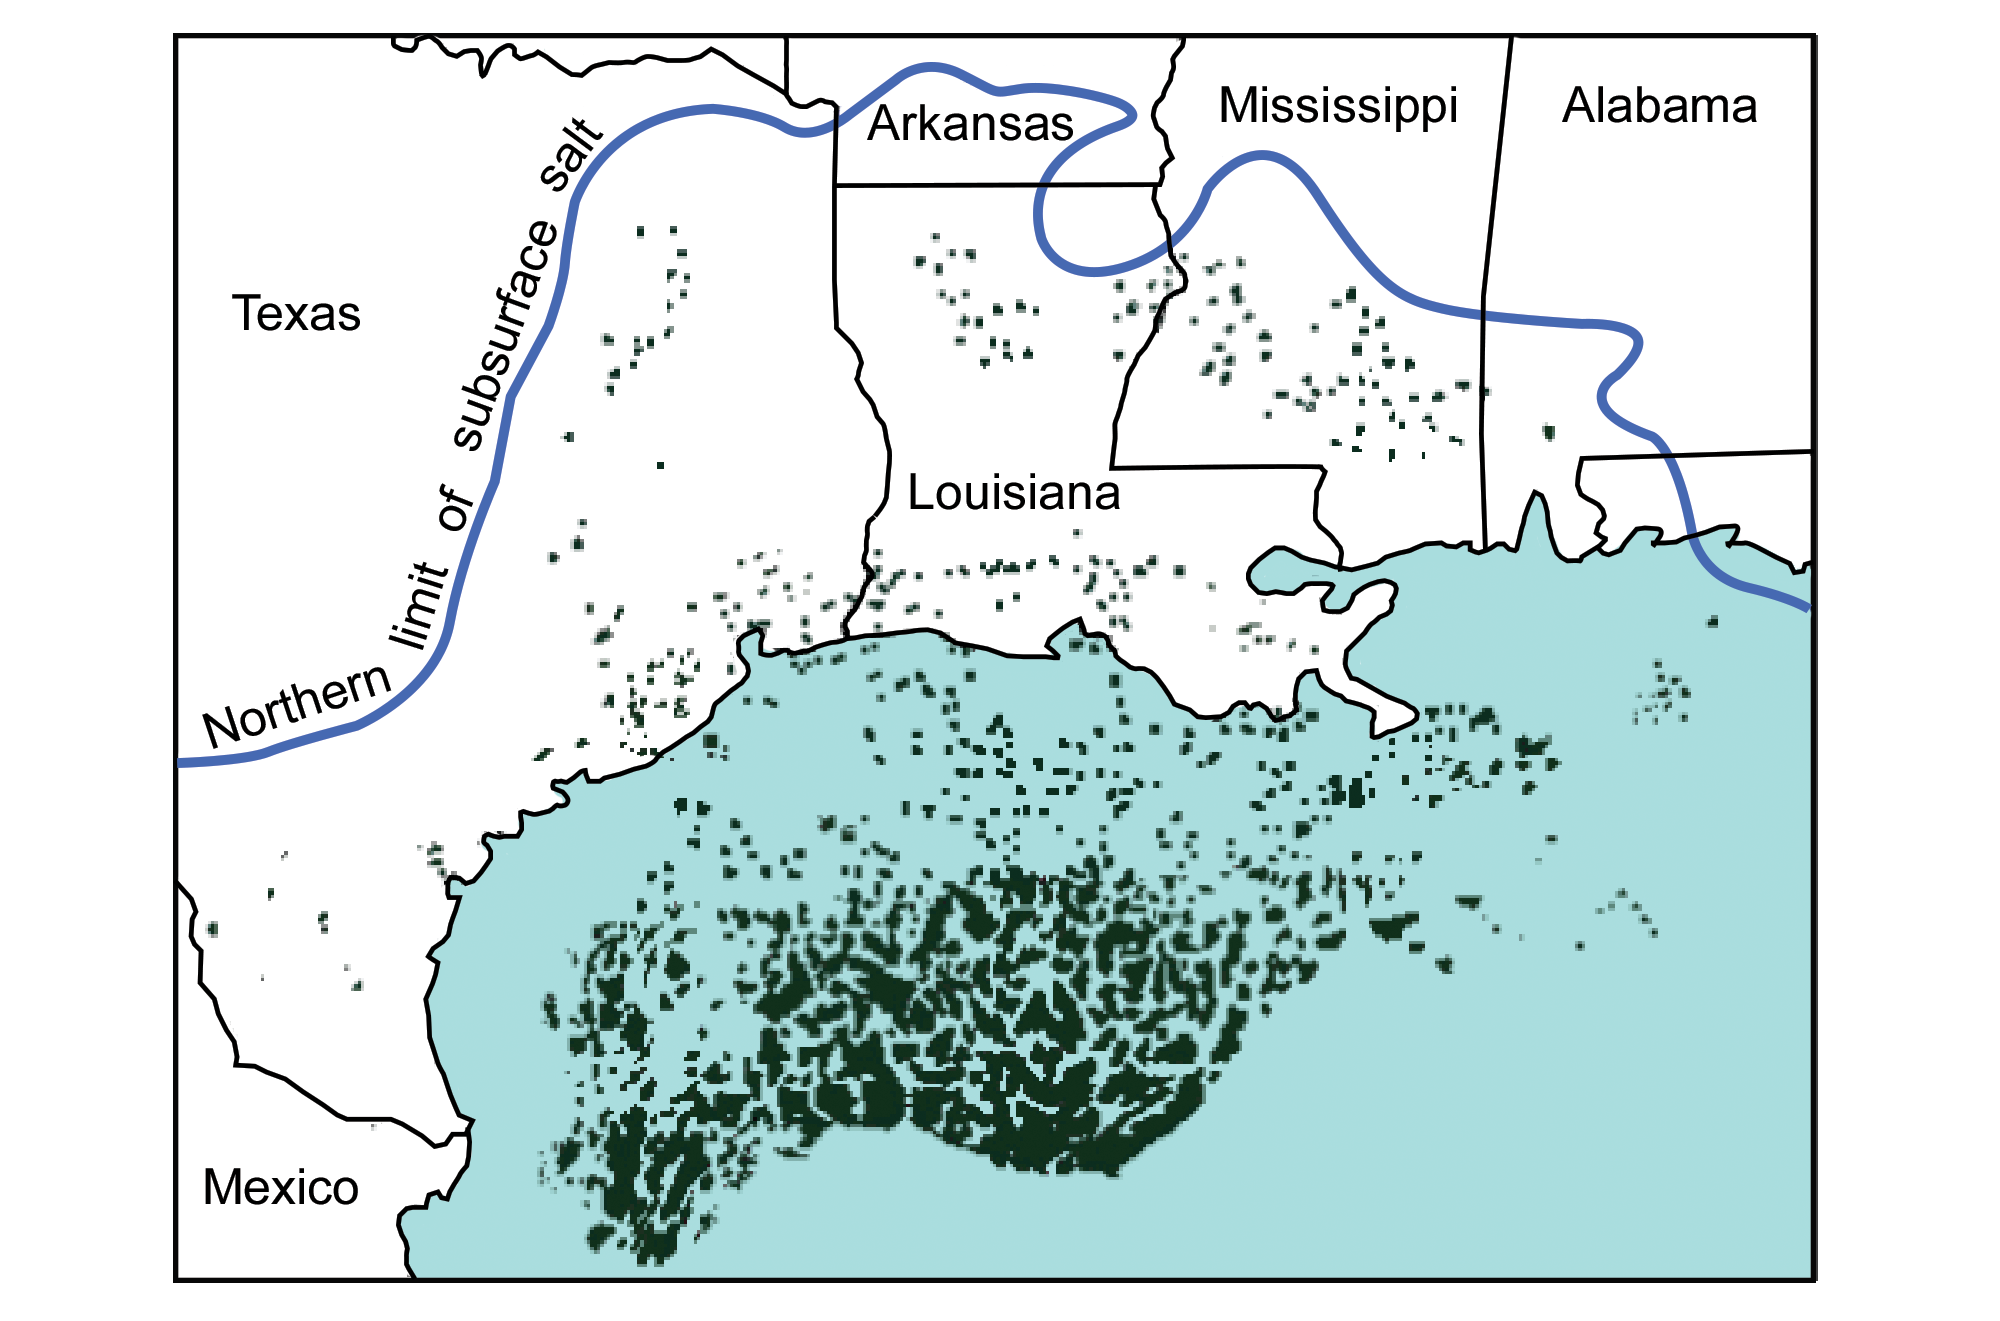 Map of the Gulf Coast and adjacent Gulf of Mexico region showing the distribution of salt structures.